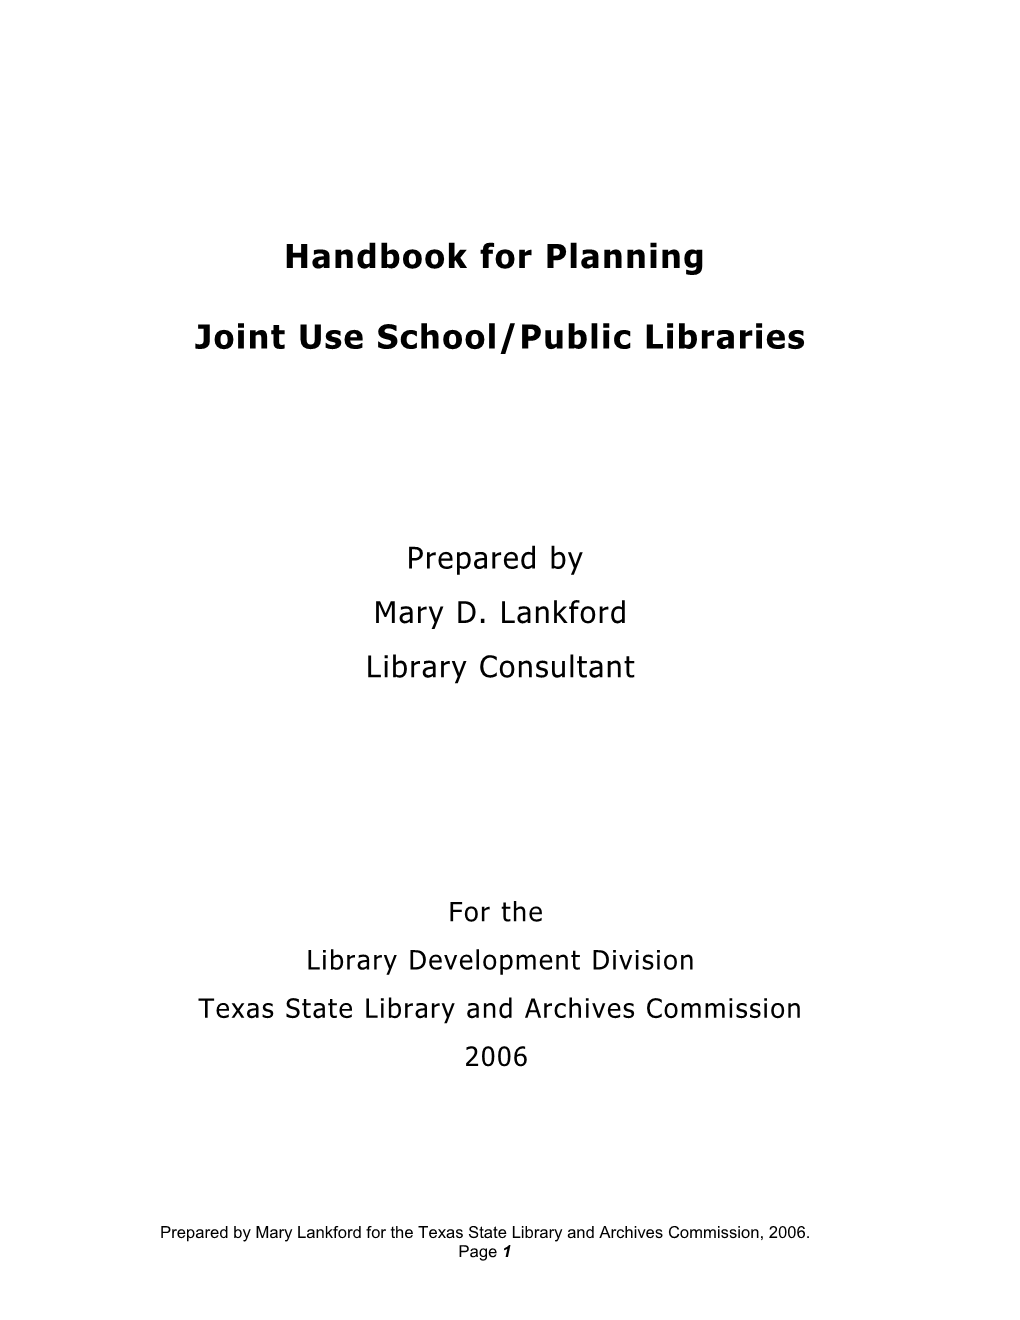 Joint Use School/Public Libraries